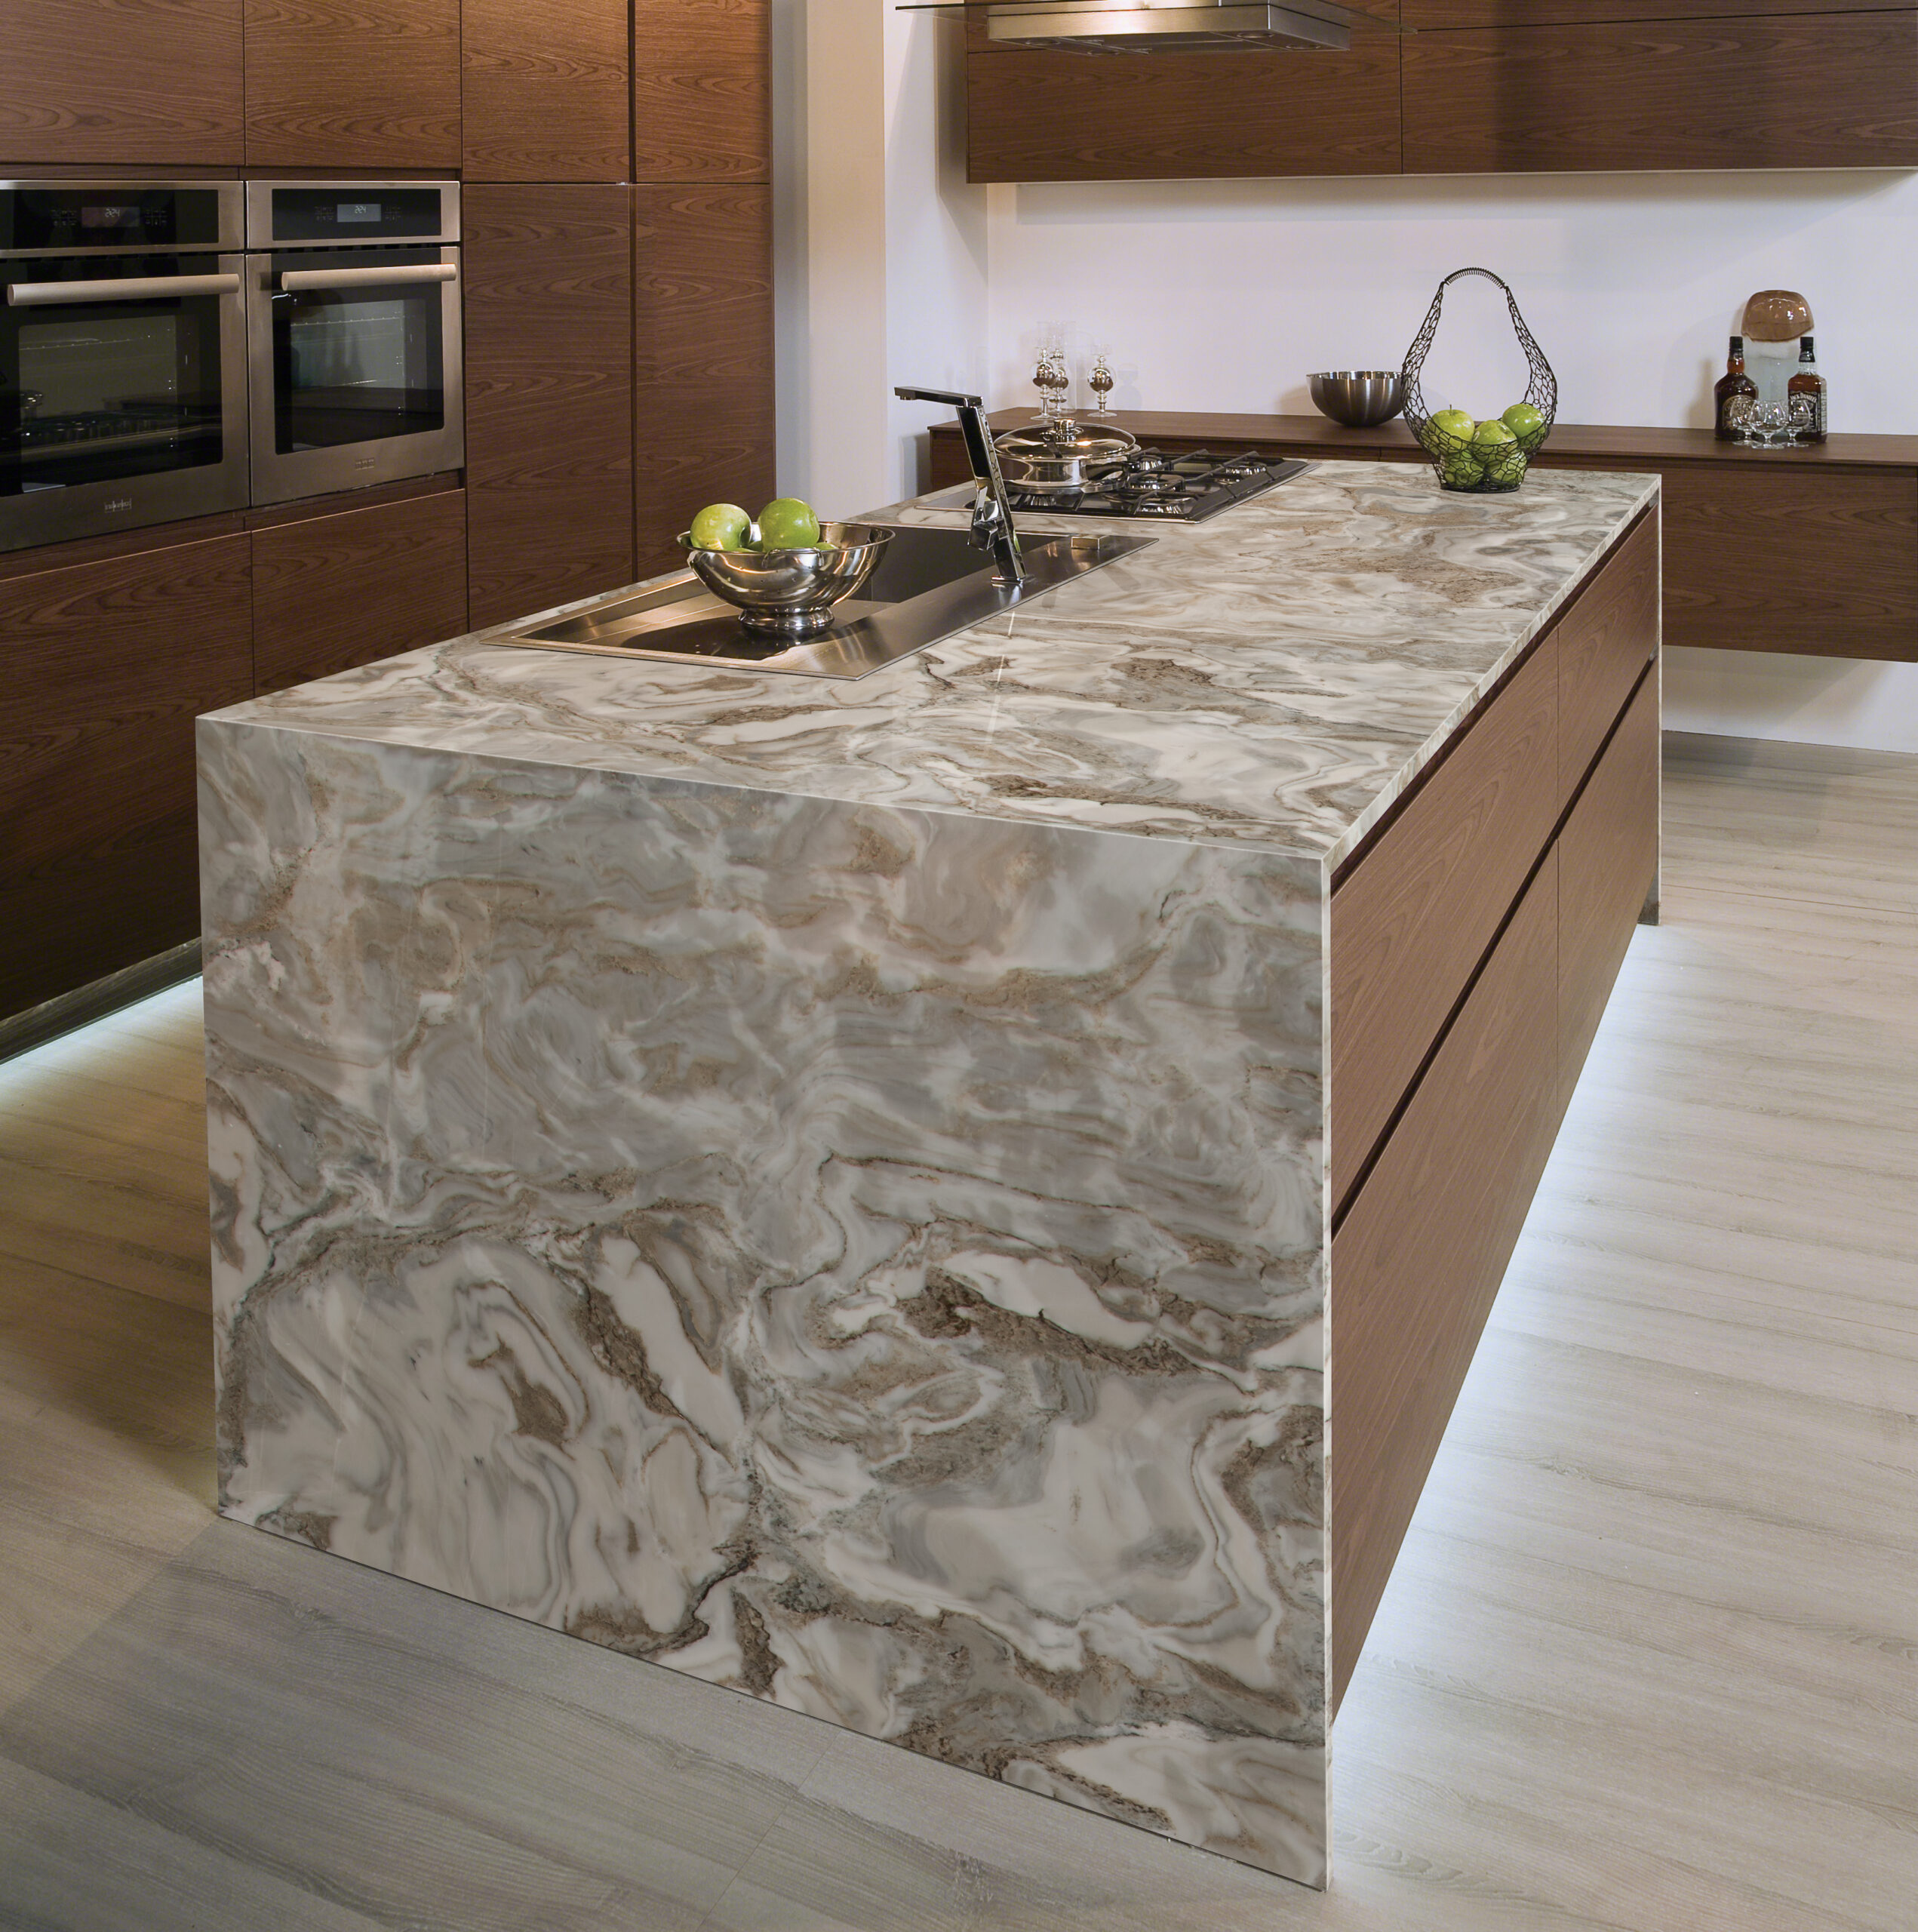 Purchasing Marble Countertops